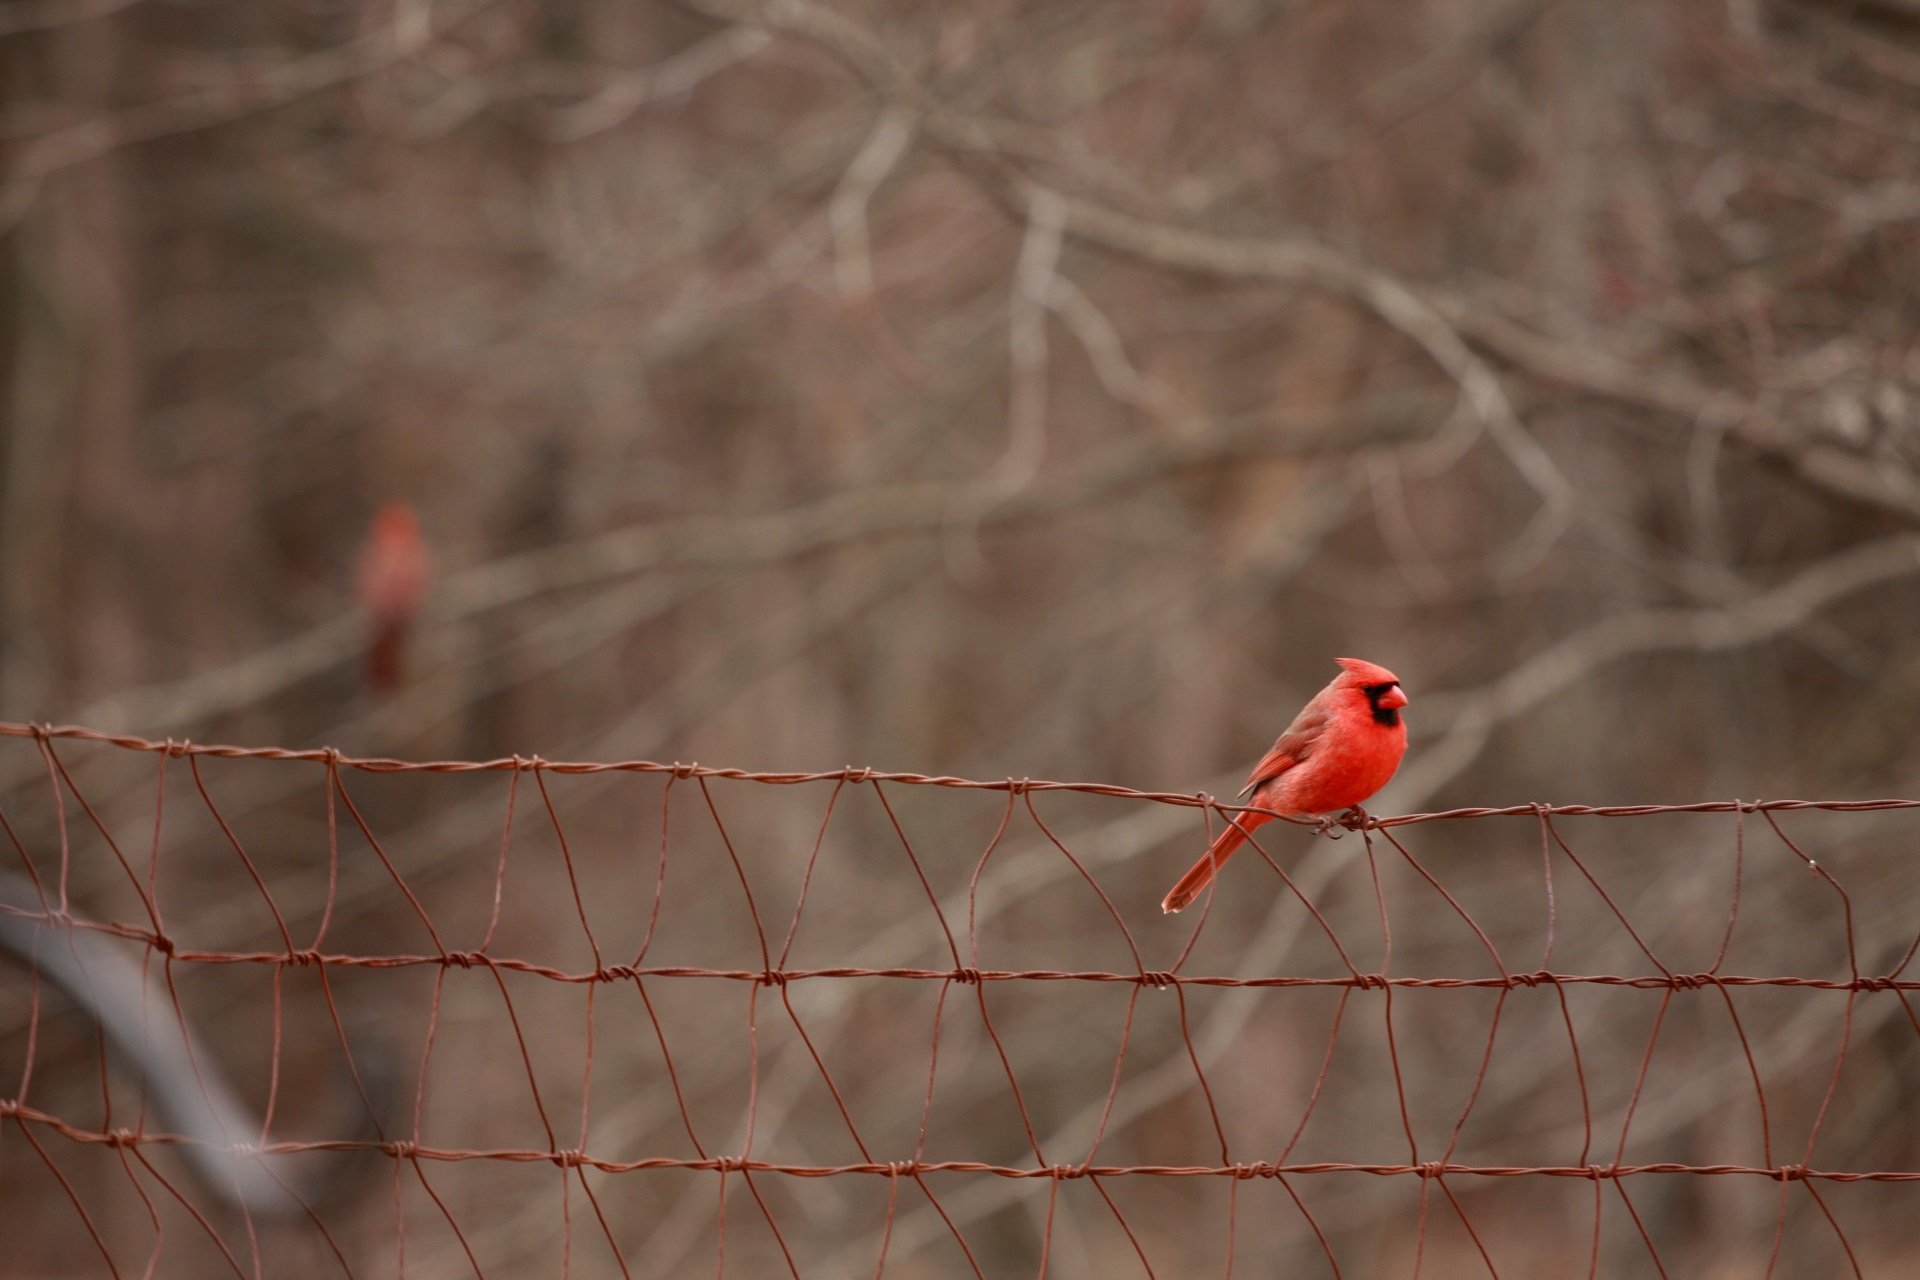 A bright red Northern Cardinal perches on a wire fence in winter. Another Cardinal perches in the trees behind it.